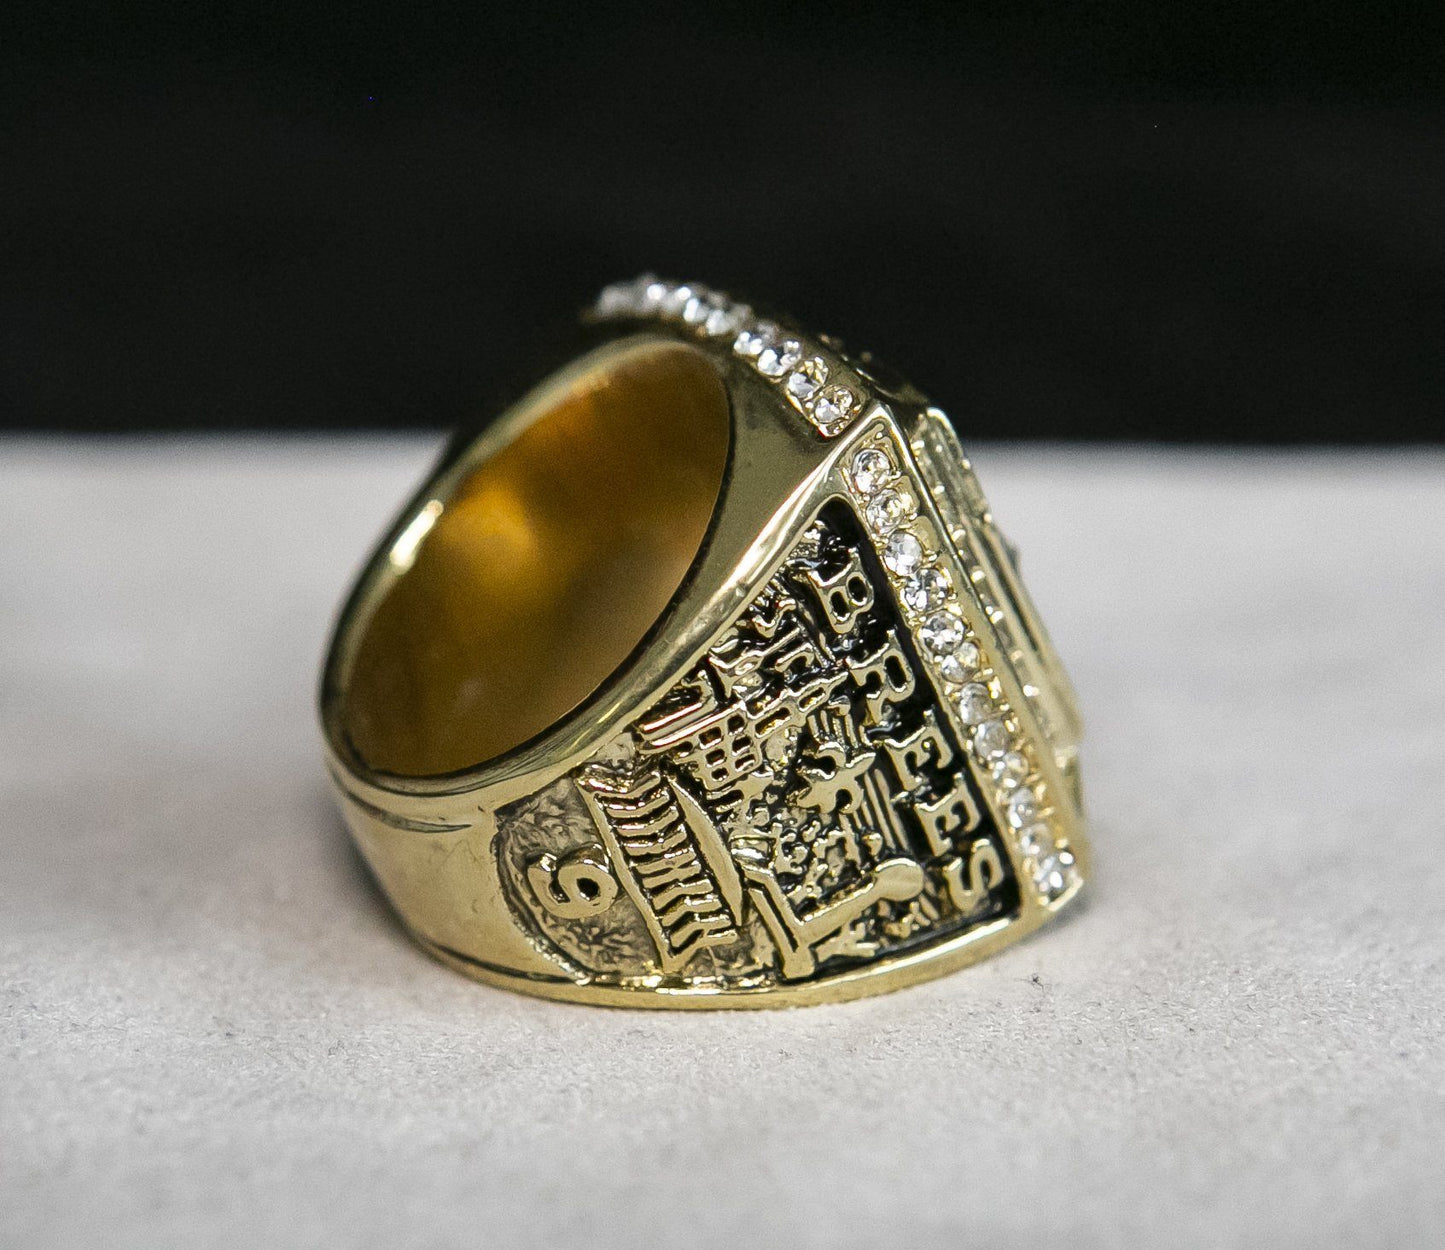 New Orleans Saints Super Bowl Ring (2009) - Rings For Champs, NFL rings, MLB rings, NBA rings, NHL rings, NCAA rings, Super bowl ring, Superbowl ring, Super bowl rings, Superbowl rings, Dallas Cowboys